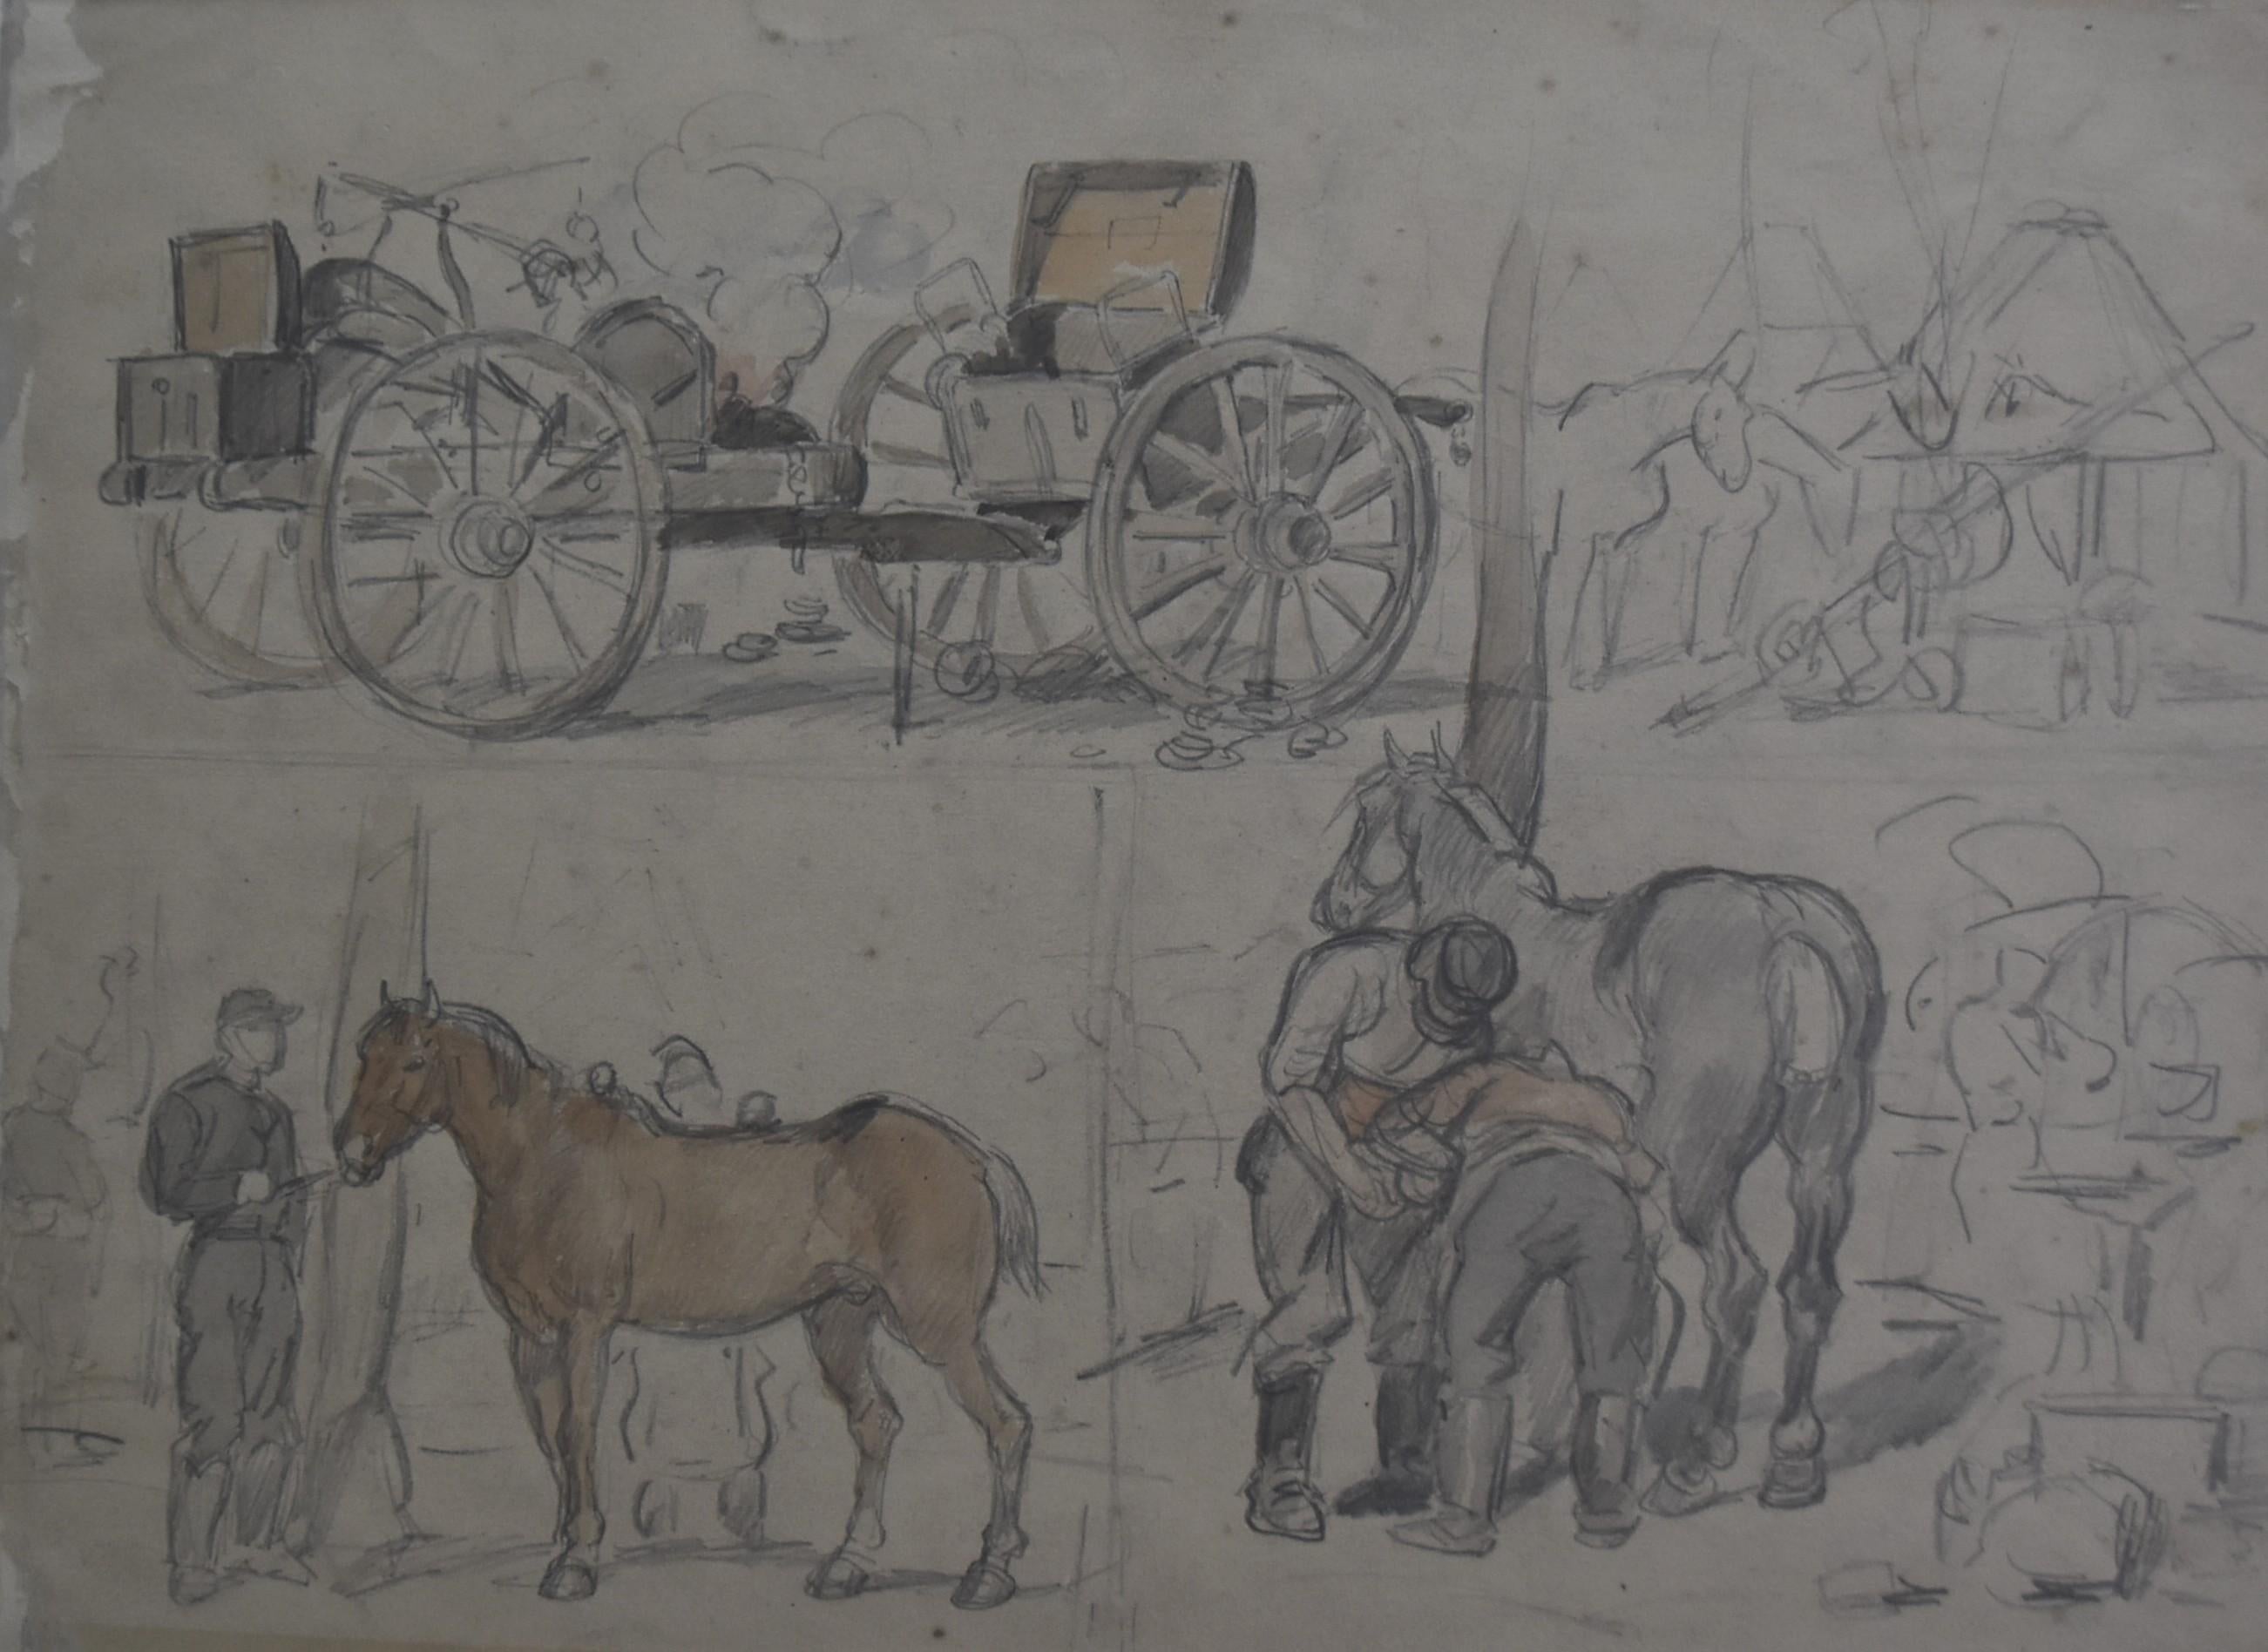 Auguste Gardanne (circa 1840- circa 1890)
Carriages and horses during the franco-prussian war of 1870
Pencil and watercolor on paper
On the reverse Studies of horses
Pencil and watercolor on paper
Mark of the Ullmann Collection (Lugt 3533) on the